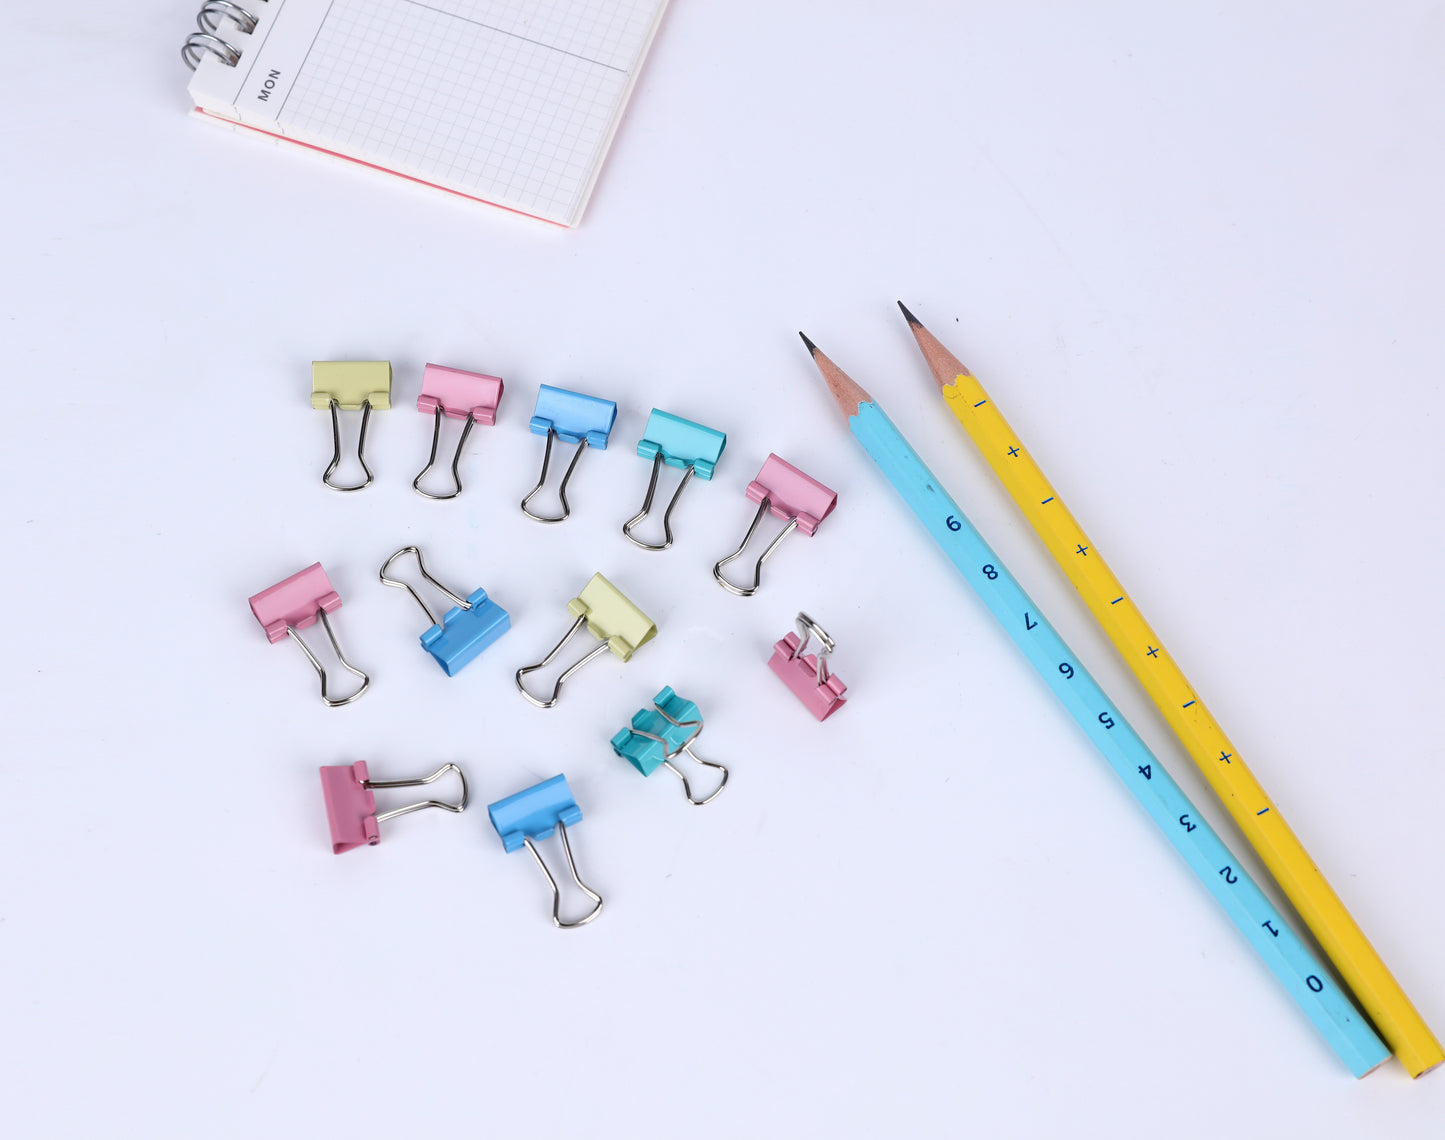 Brustro Clip Box Set of 56 Binder Clips and 120 Paper Clips, Stationery Binding Supplies for Loose Papers, Files, DIY, Office and School Use